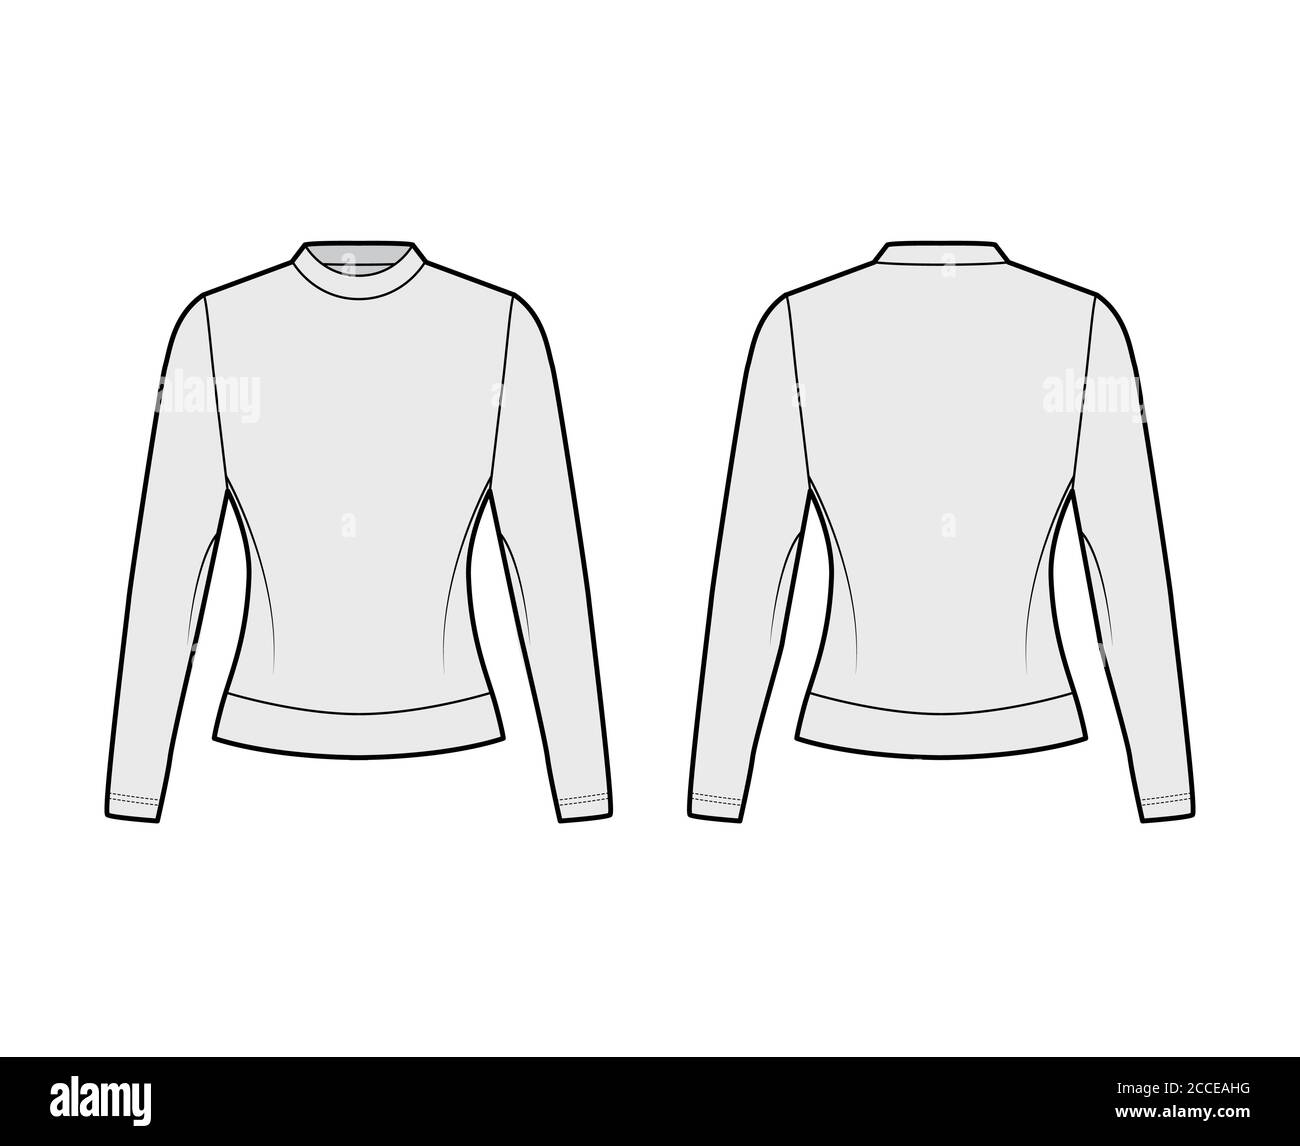 Cotton-terry sweatshirt technical fashion illustration with fitted body, crew neckline, long sleeves. Flat jumper apparel outwear template front, back, grey color. Women, men, unisex top CAD mockup Stock Vector